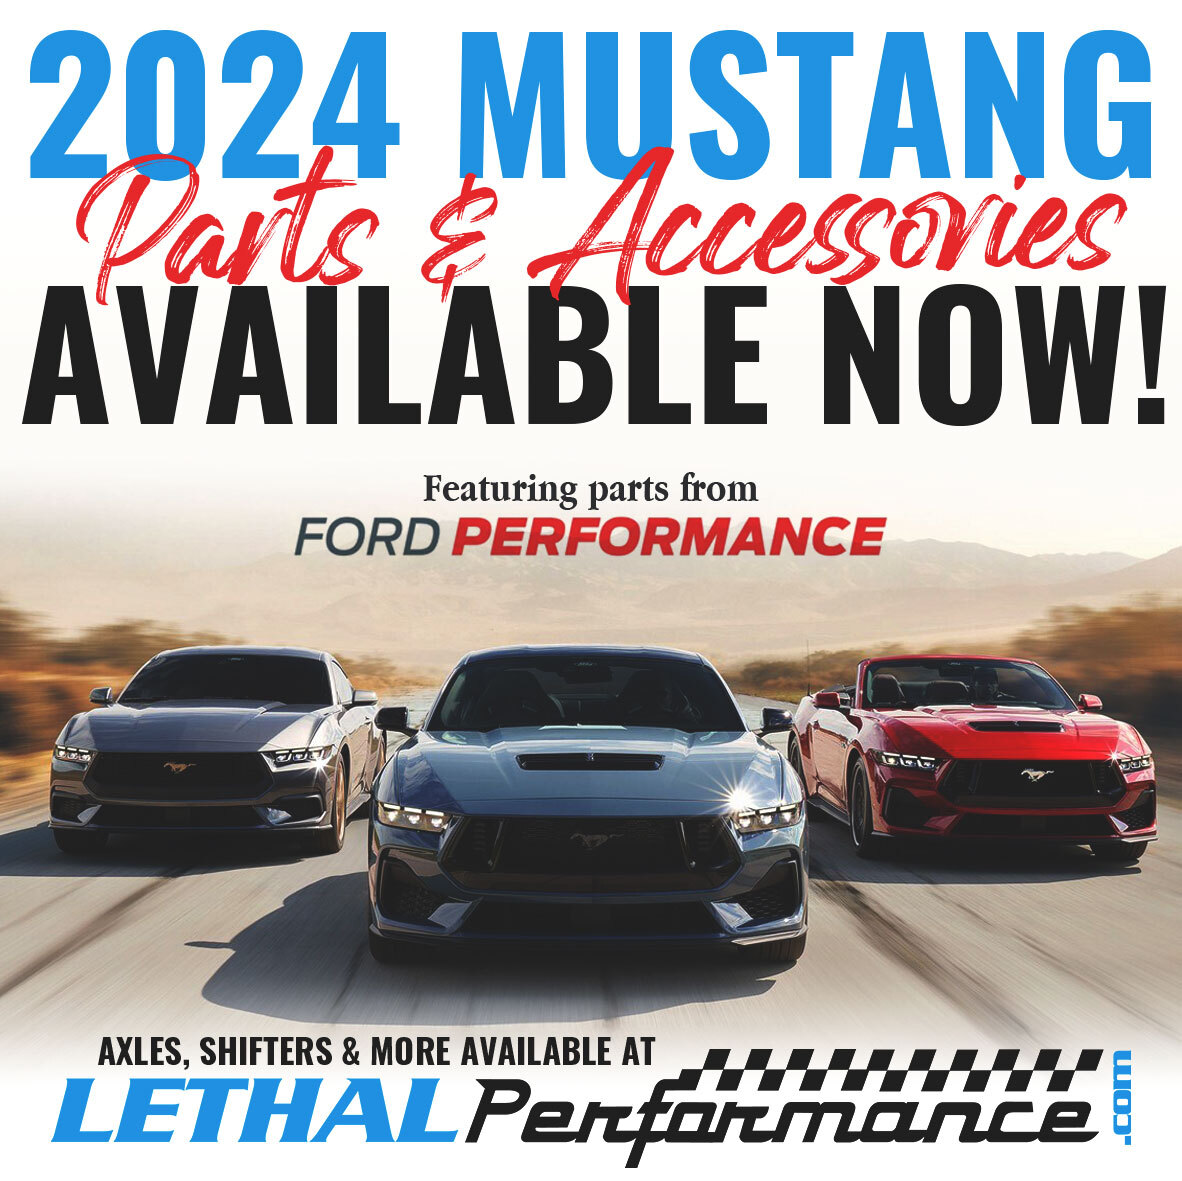 S650 Mustang 2024 Mustang Parts & Accessories at Lethal Performance! 2024mustan